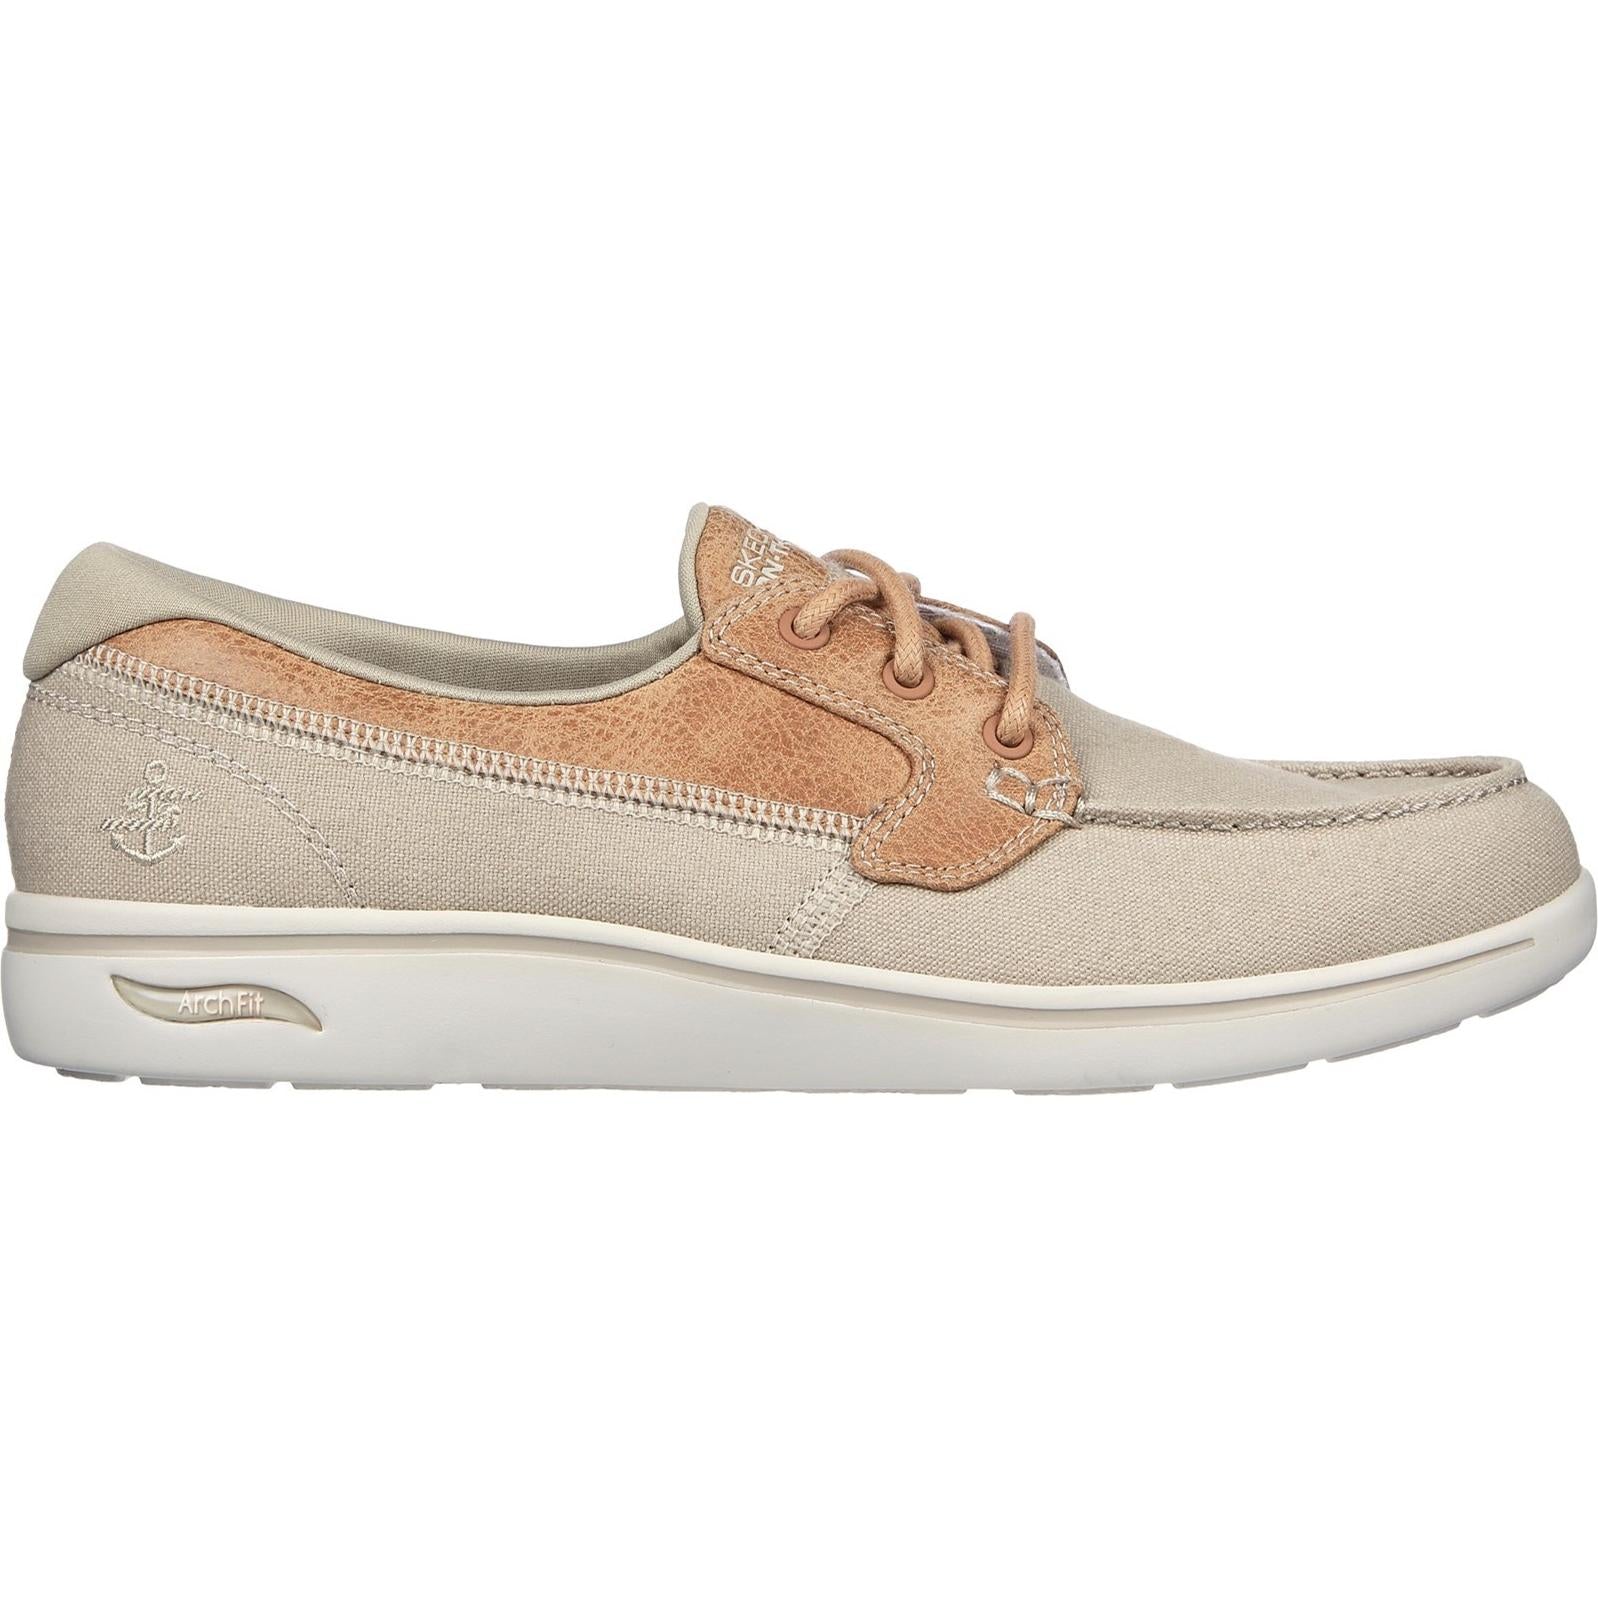 Skechers Arch Fit Uplift Cruise'n By Shoe